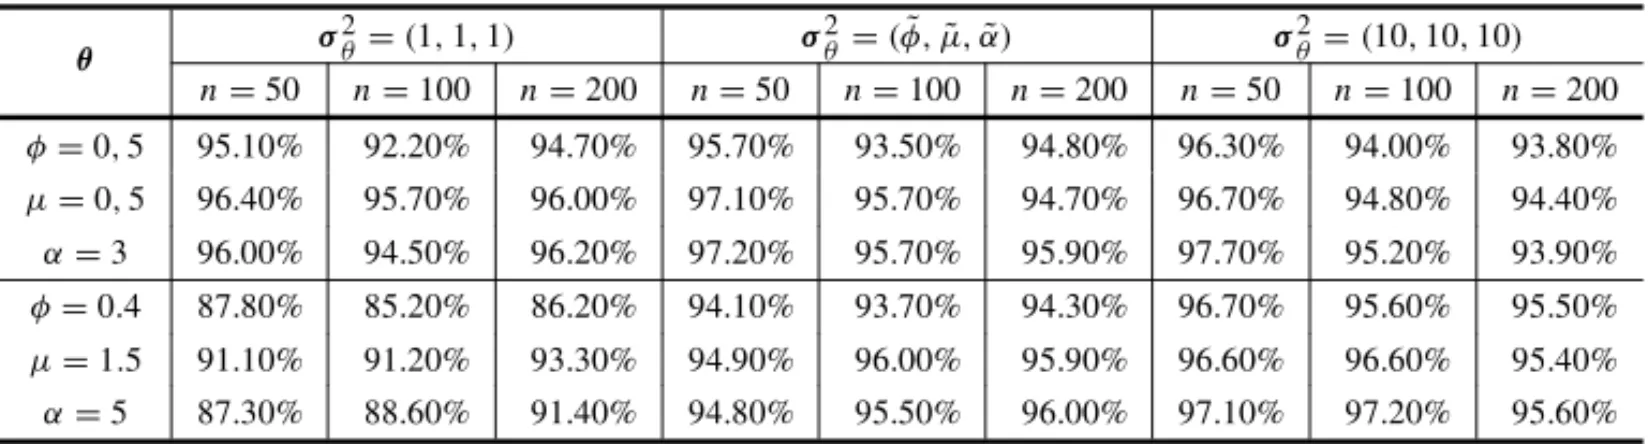 Table 7 – Coverage probabilities with a confidence level of 95% of the estimates of posterior means obtained from 1000 simulated samples of size n = (50, 100, 200), with different values of θ , using the gamma prior distribution with λ = ( φ,˜ µ,˜ α),˜ σ 2